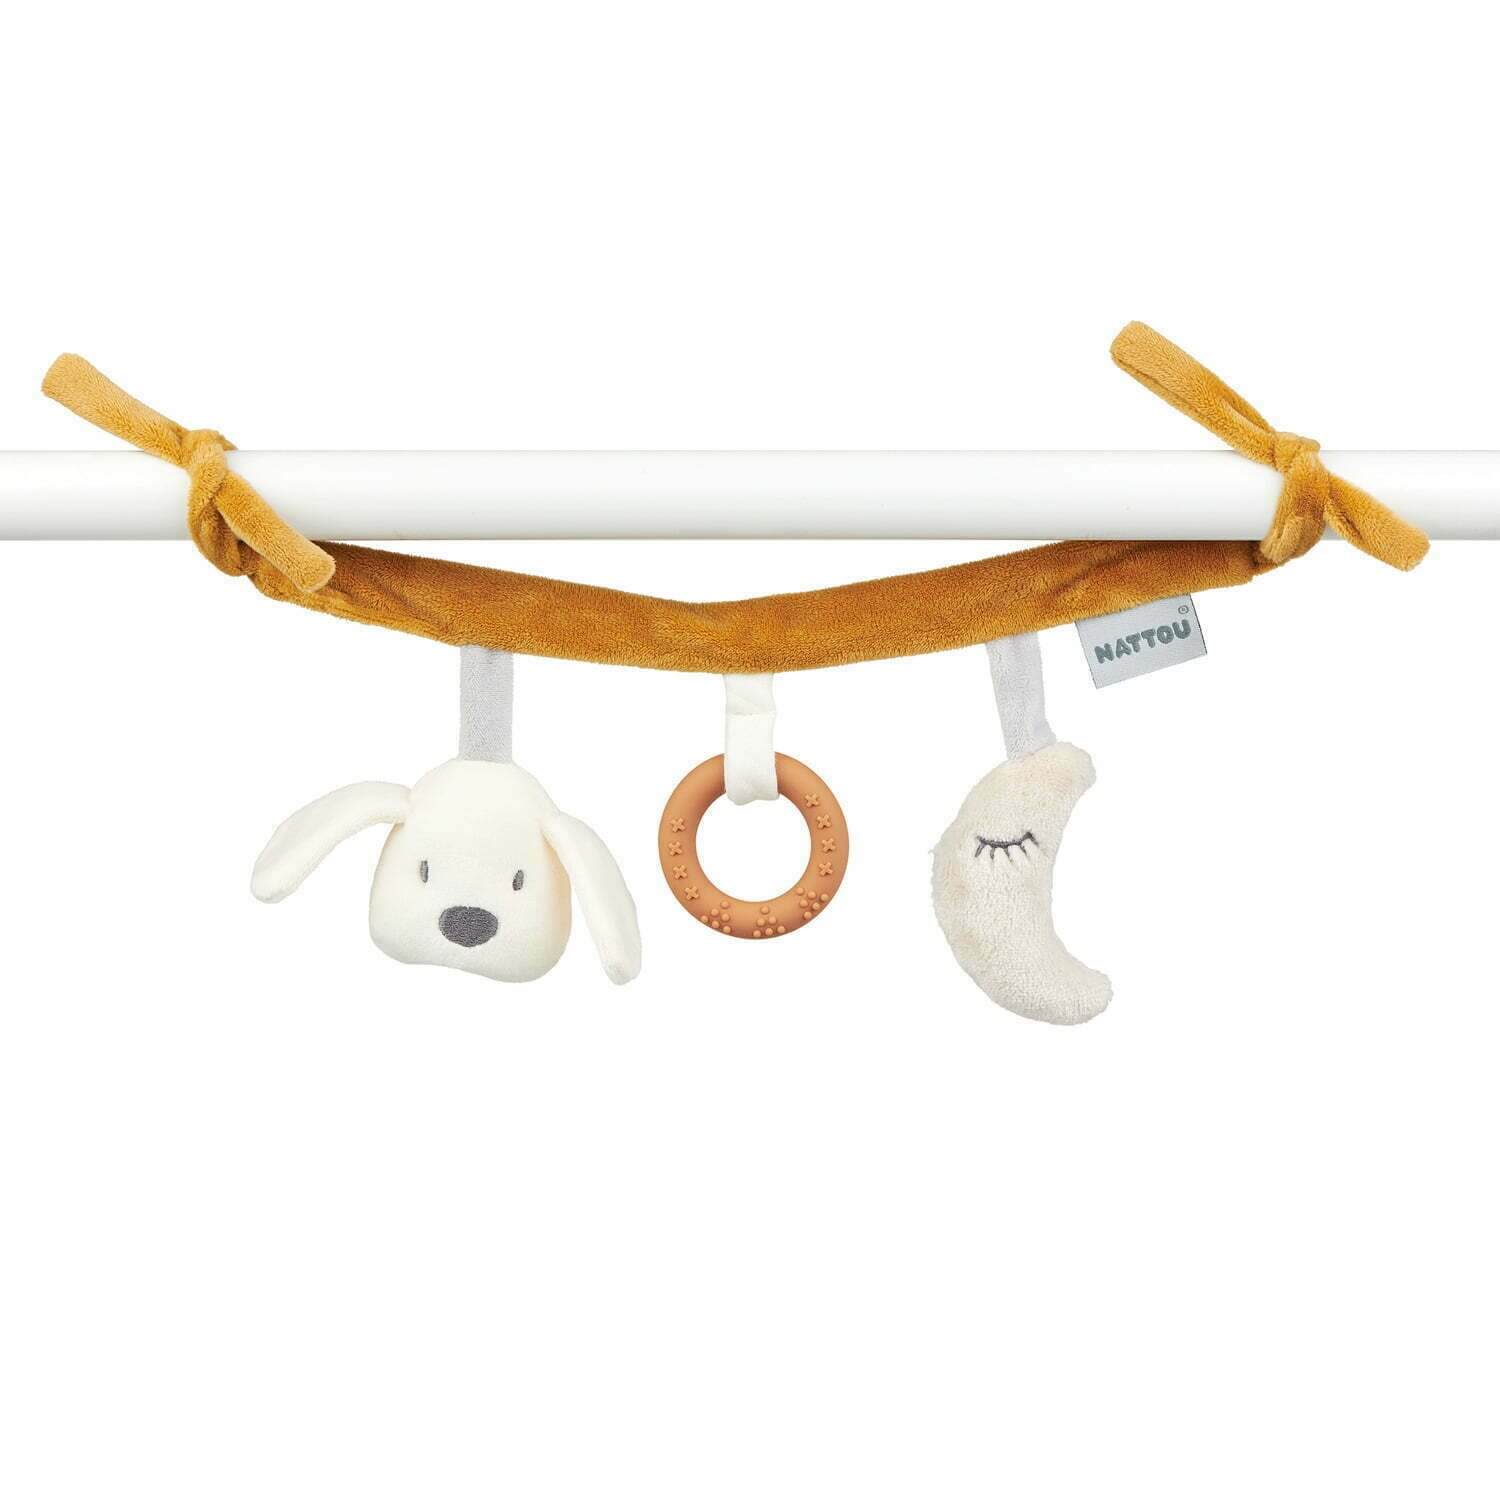 The Nattou Maxitoy is perfect for attaching to car seats, strollers, cribs, and cot bars, offering your child an enchanting companion wherever you go.